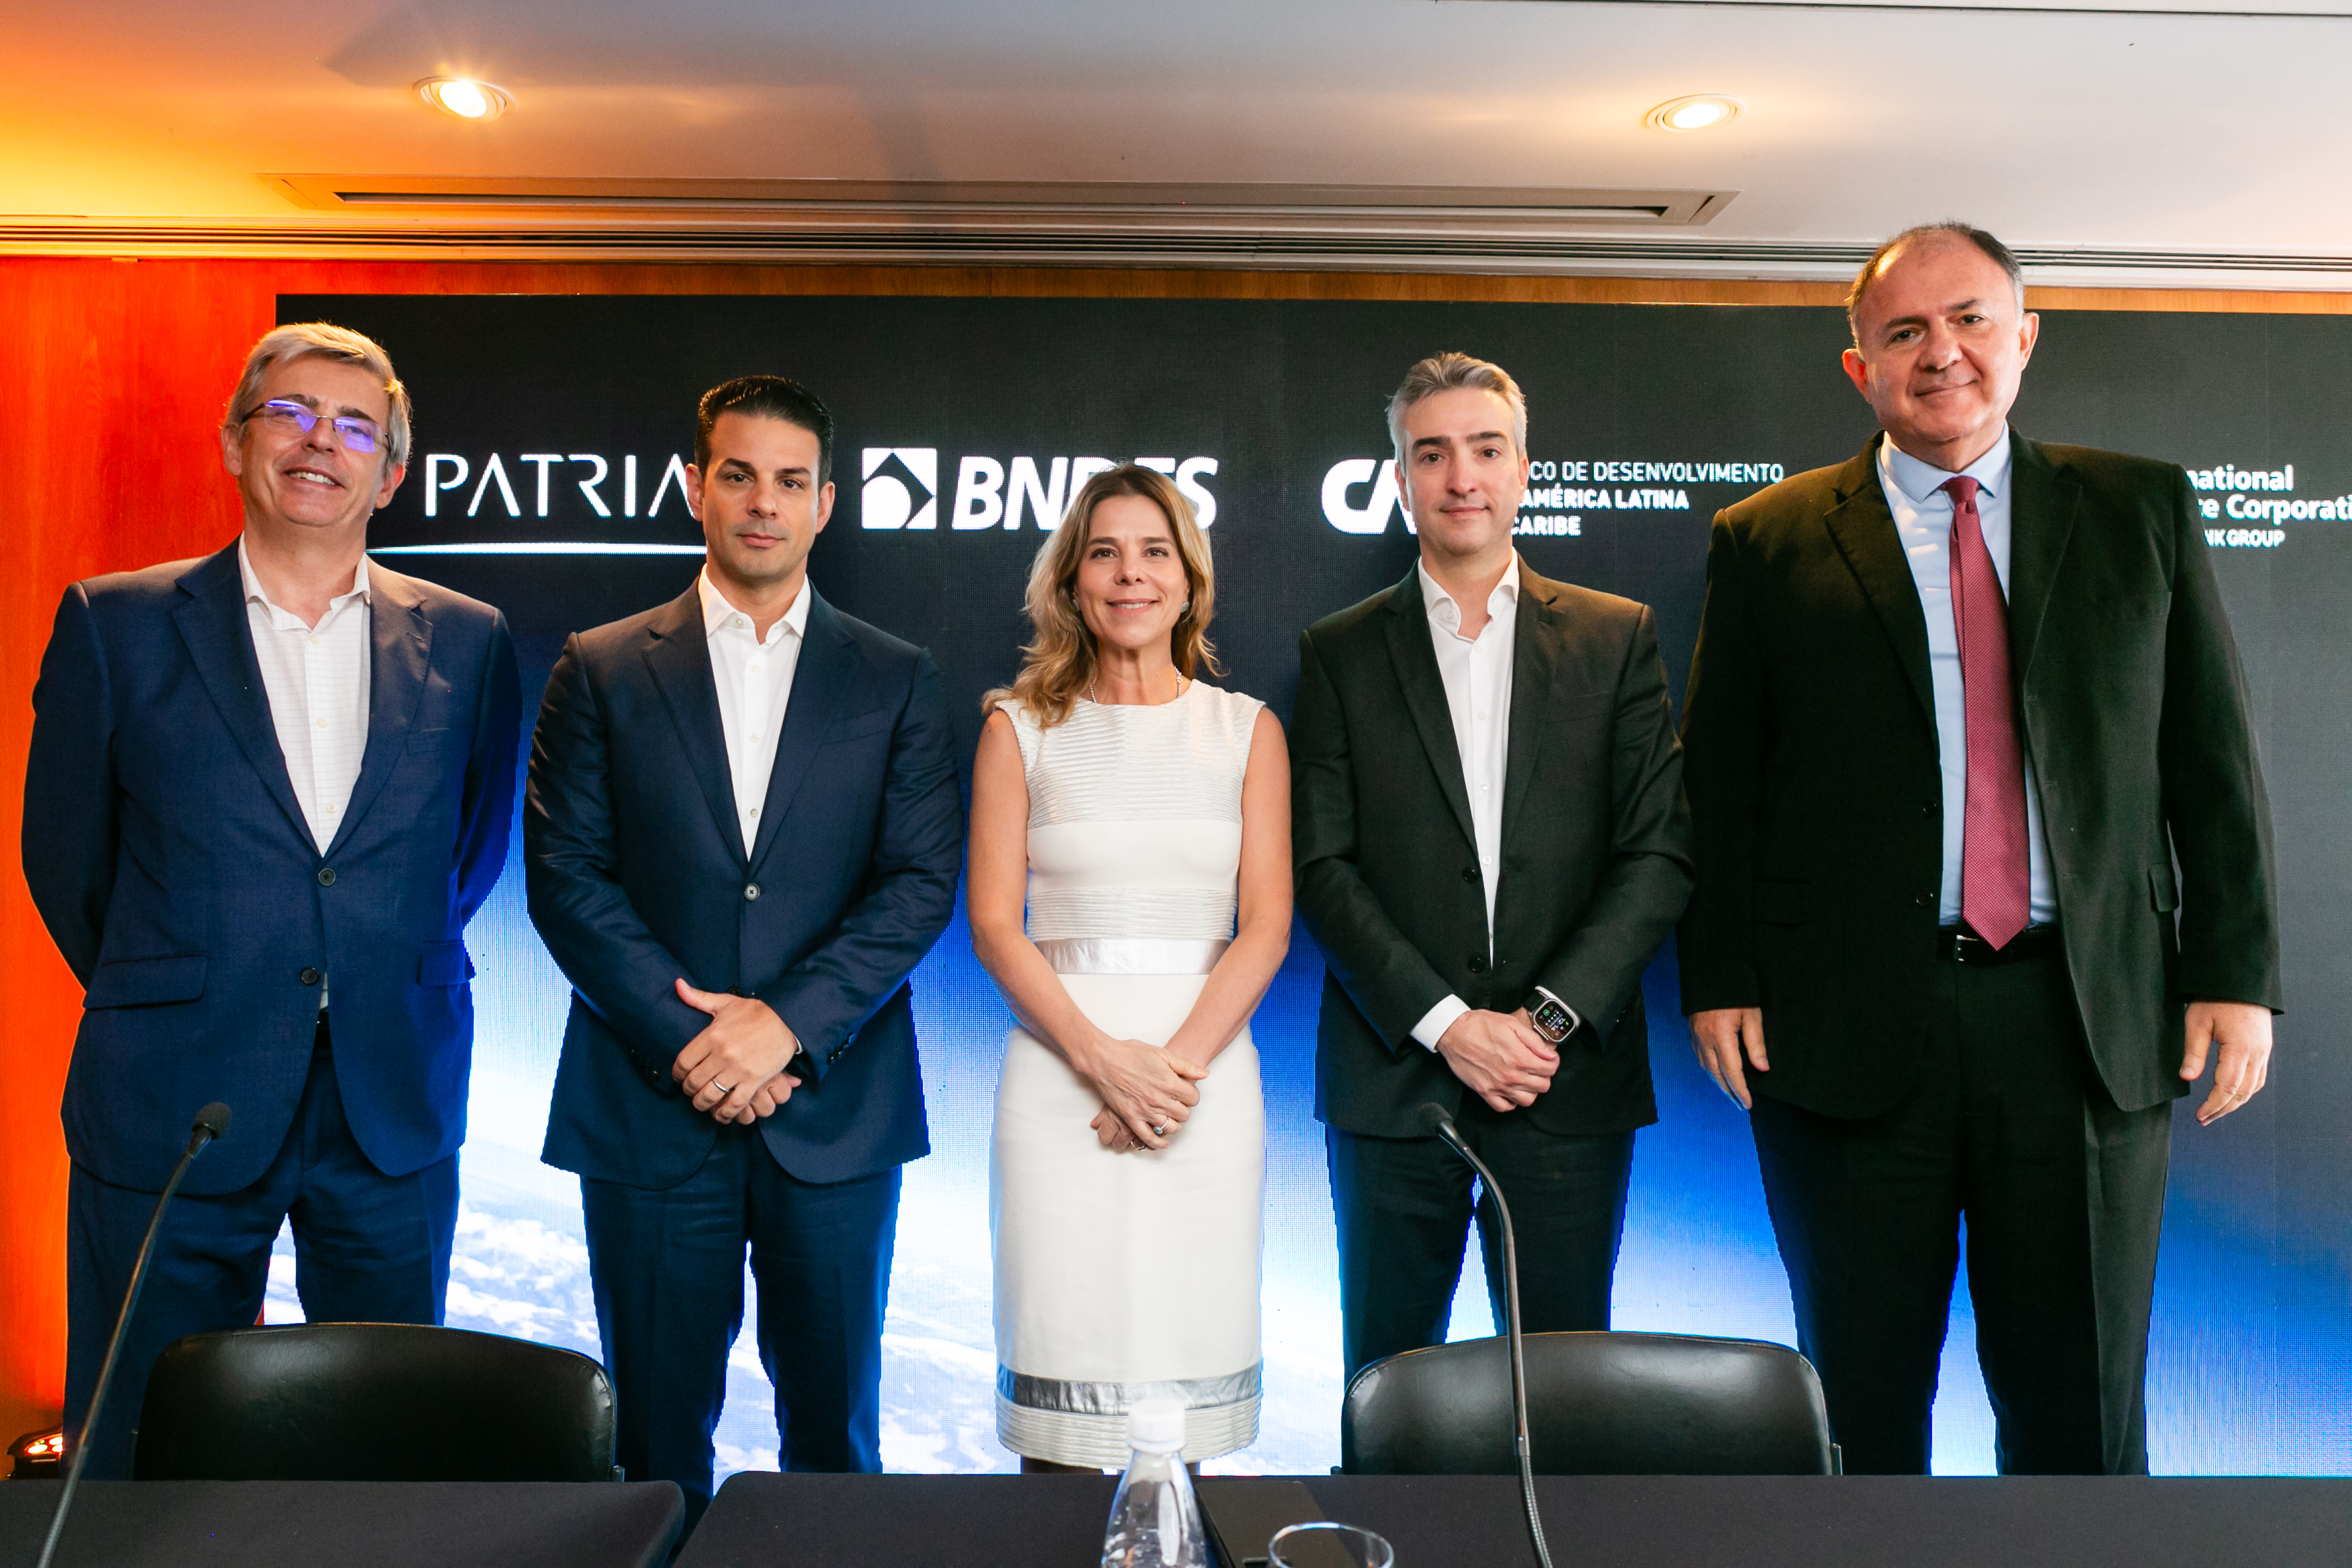 Pátria and CAF lauch Investment Credit Fund in Brazil